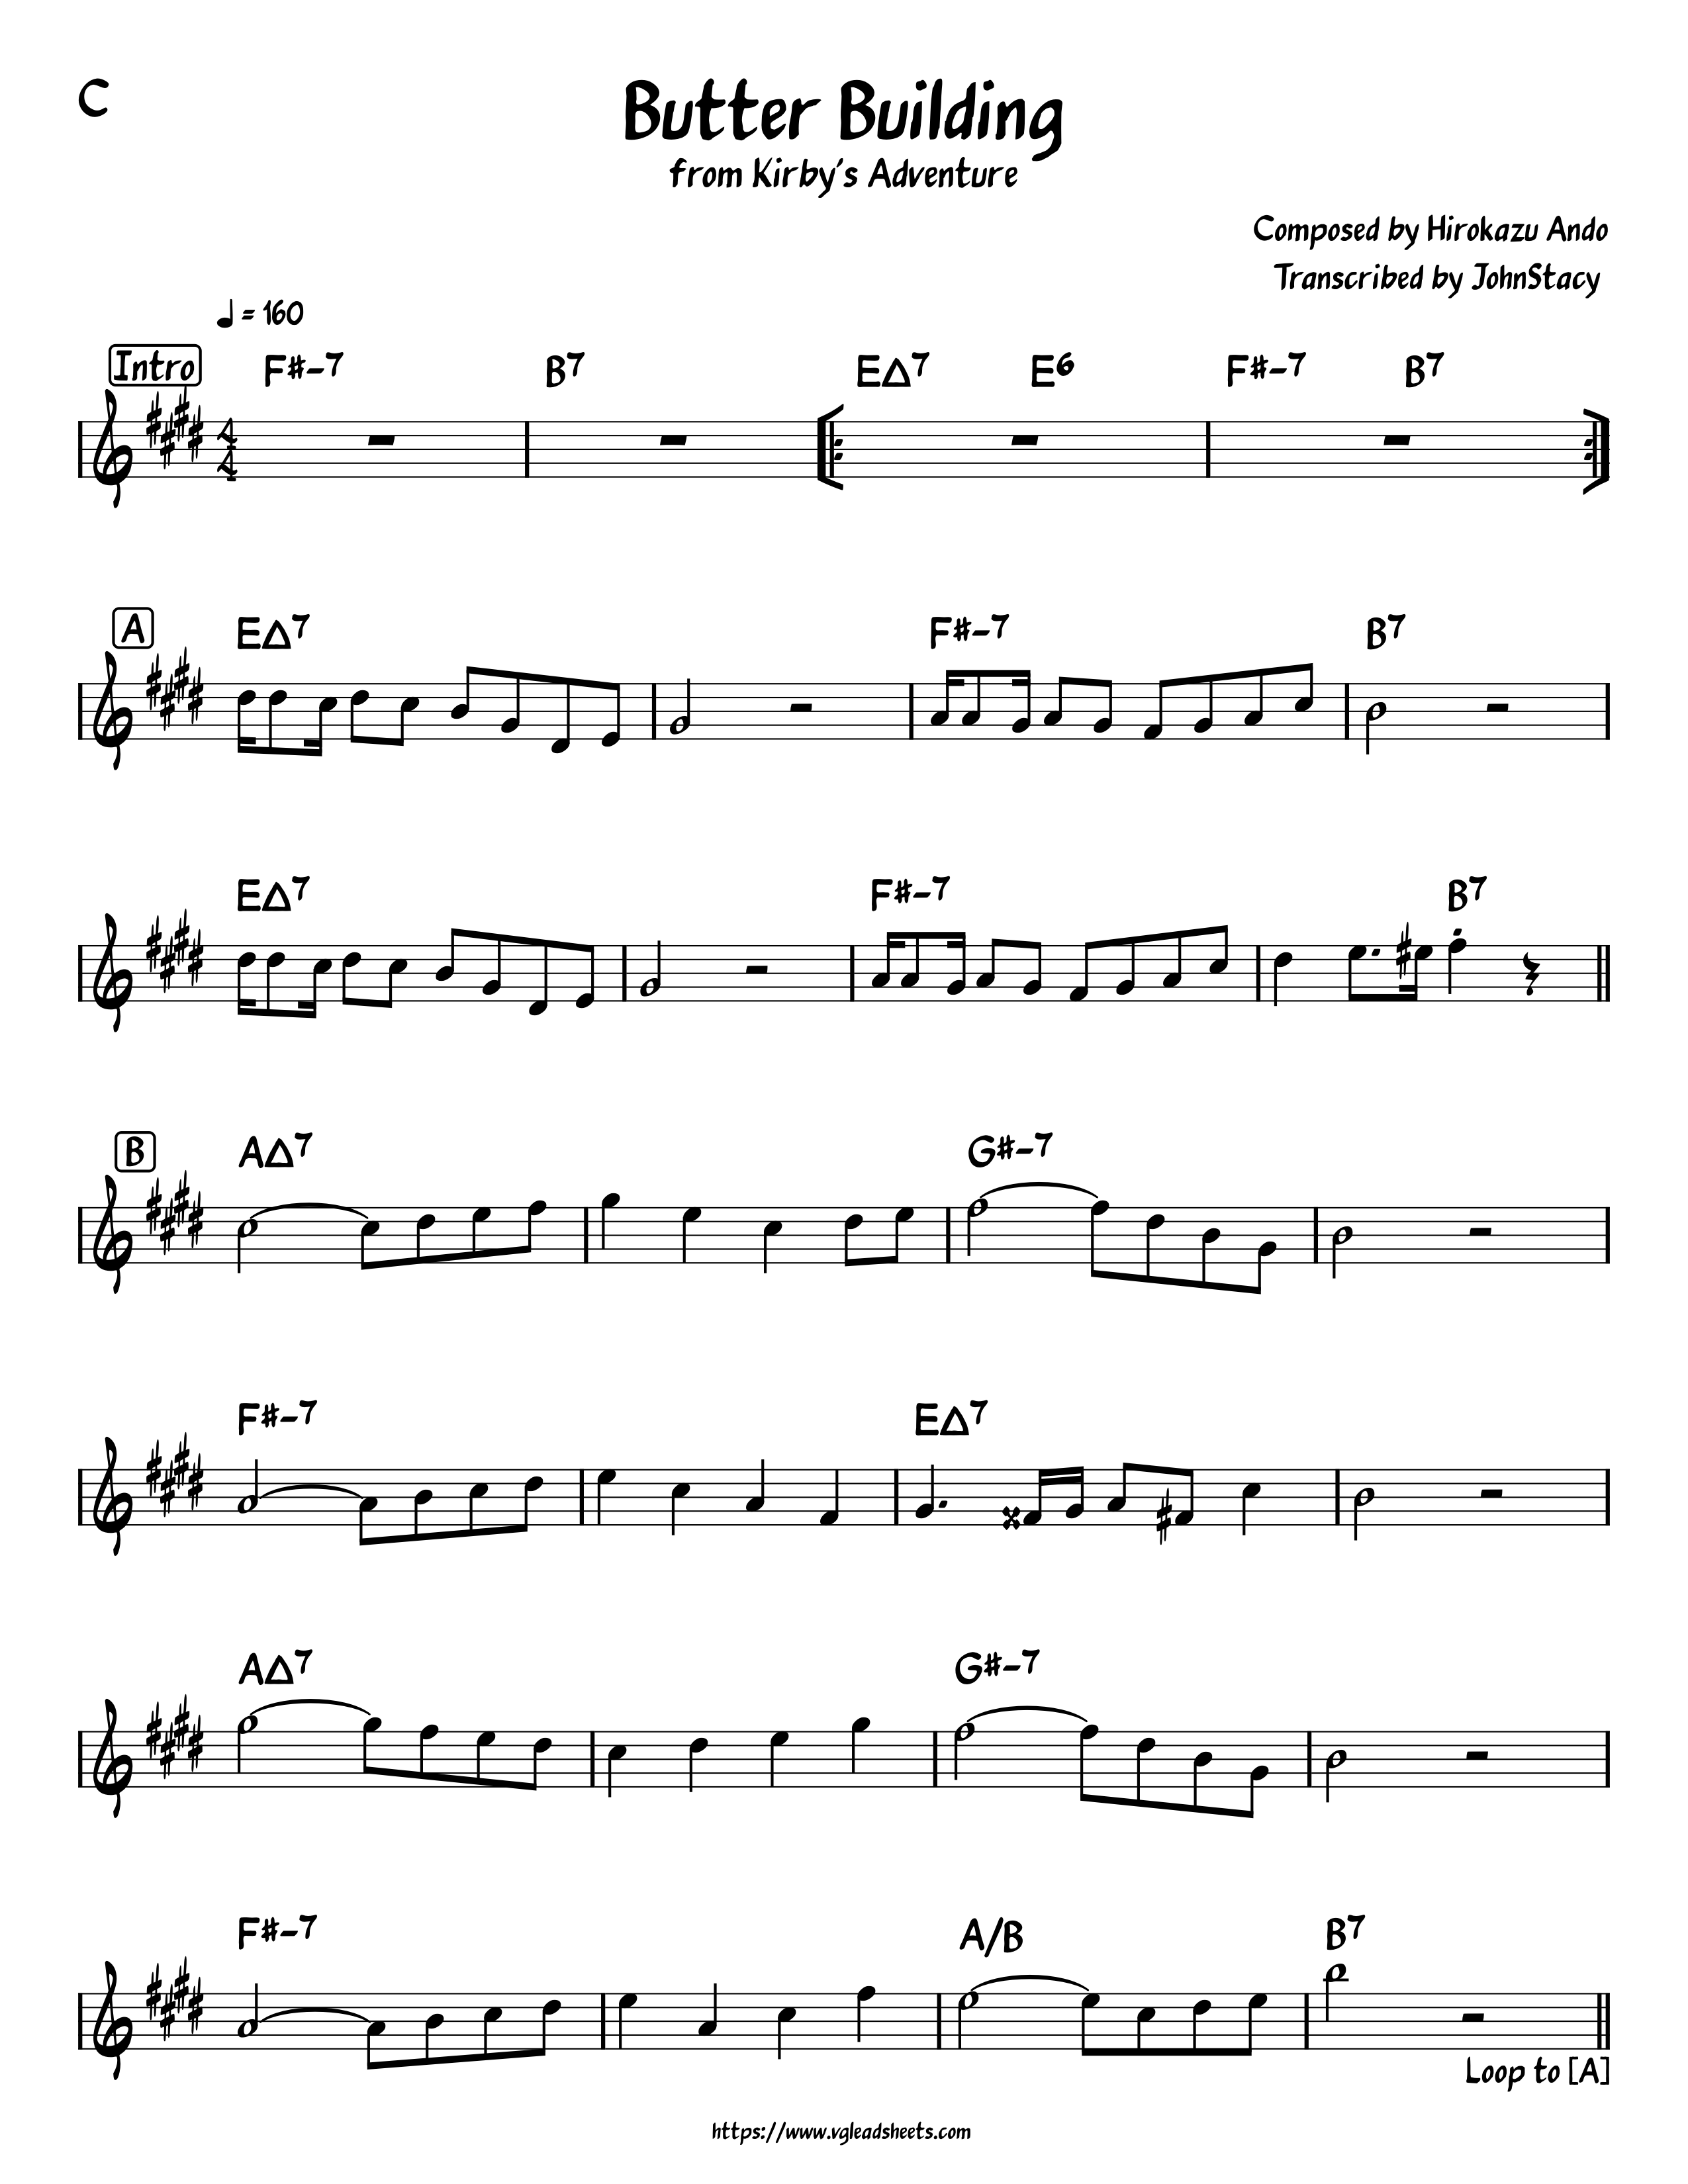 Kirby's Adventure - Butter Building  - Lead Sheets for  Video Game Music